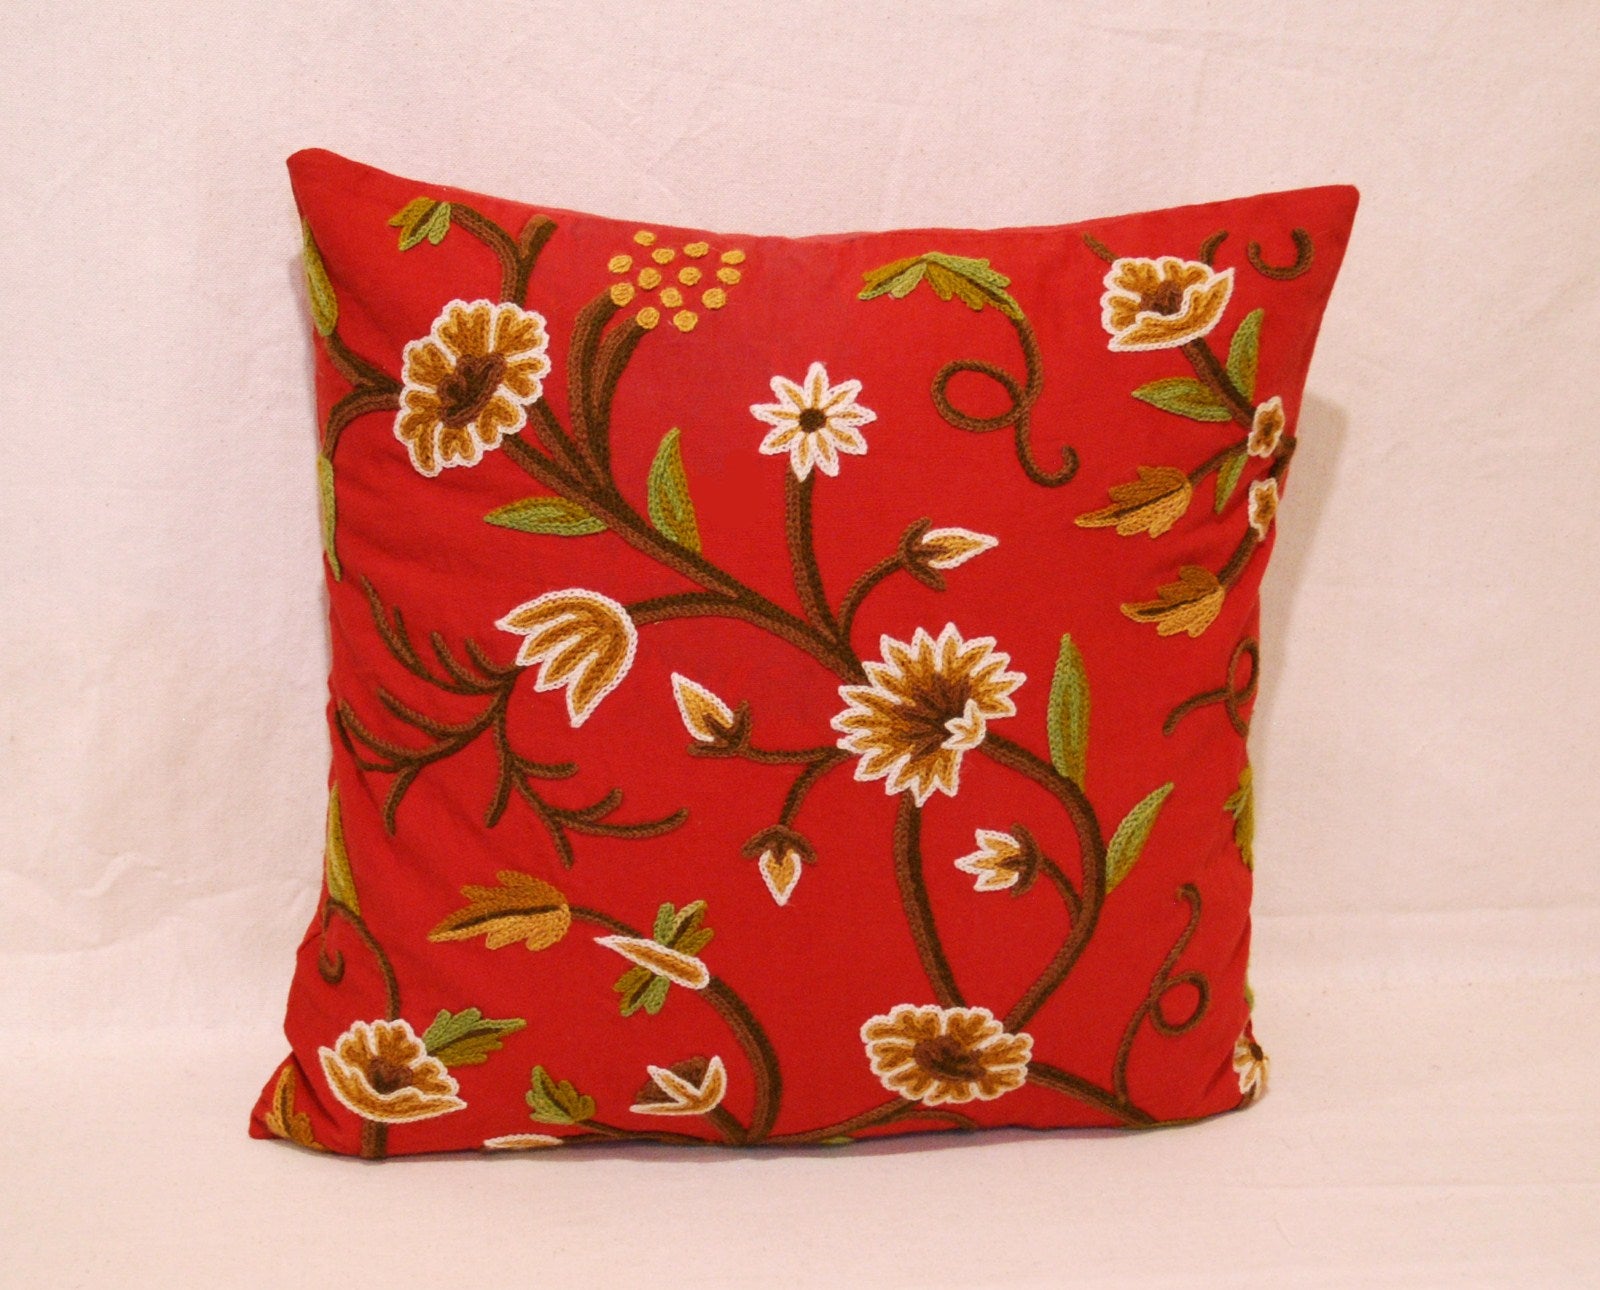 Crewel Wool on Cotton Throw Pillow Cushion Cover Red, Multicolor #CW231